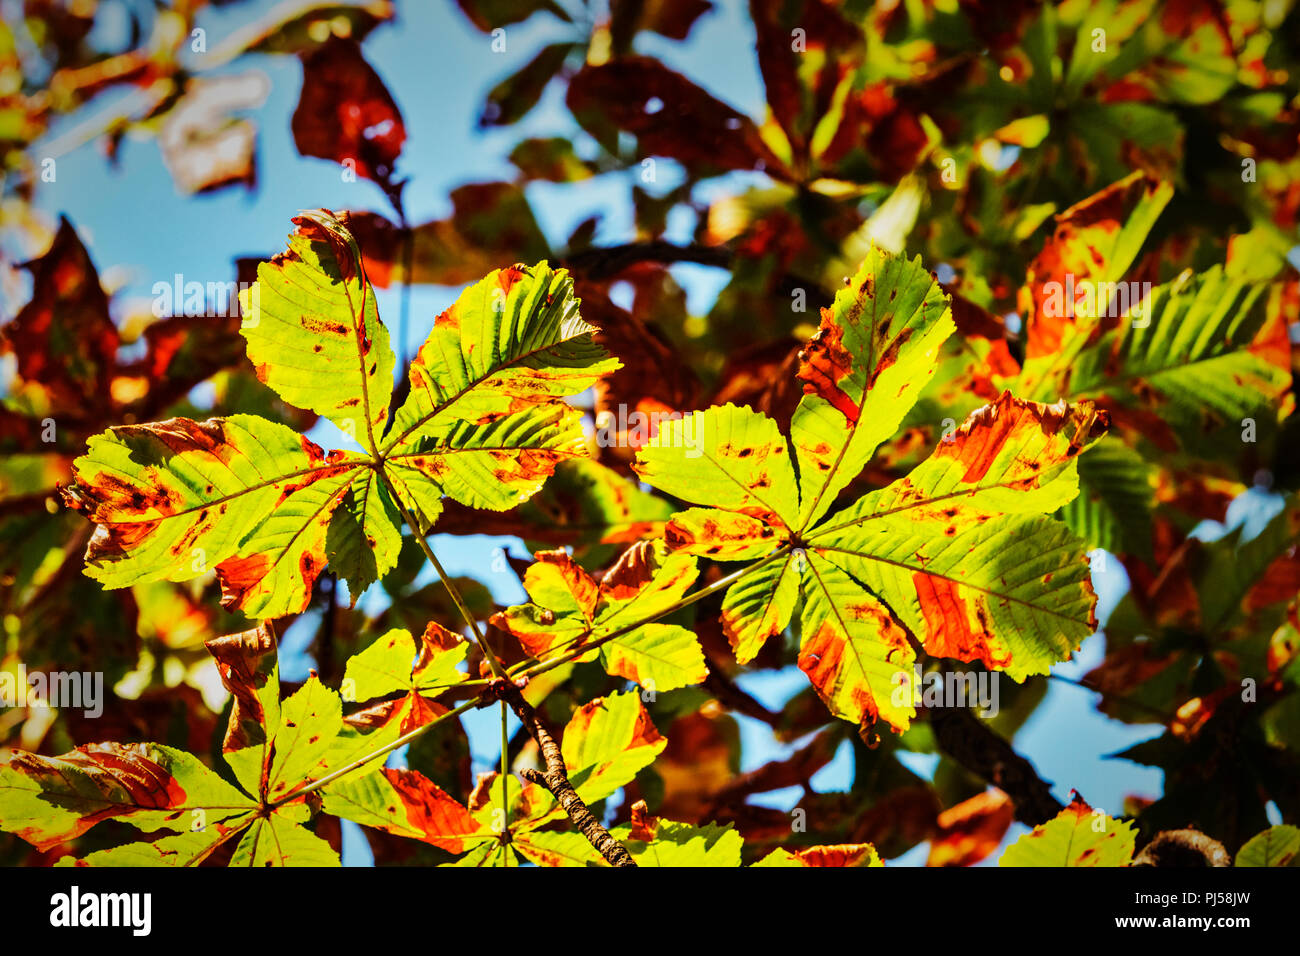 Beautiful horse chestnut leaves against the blue sky ,texture and colors highlighted , low angle view , Stock Photo